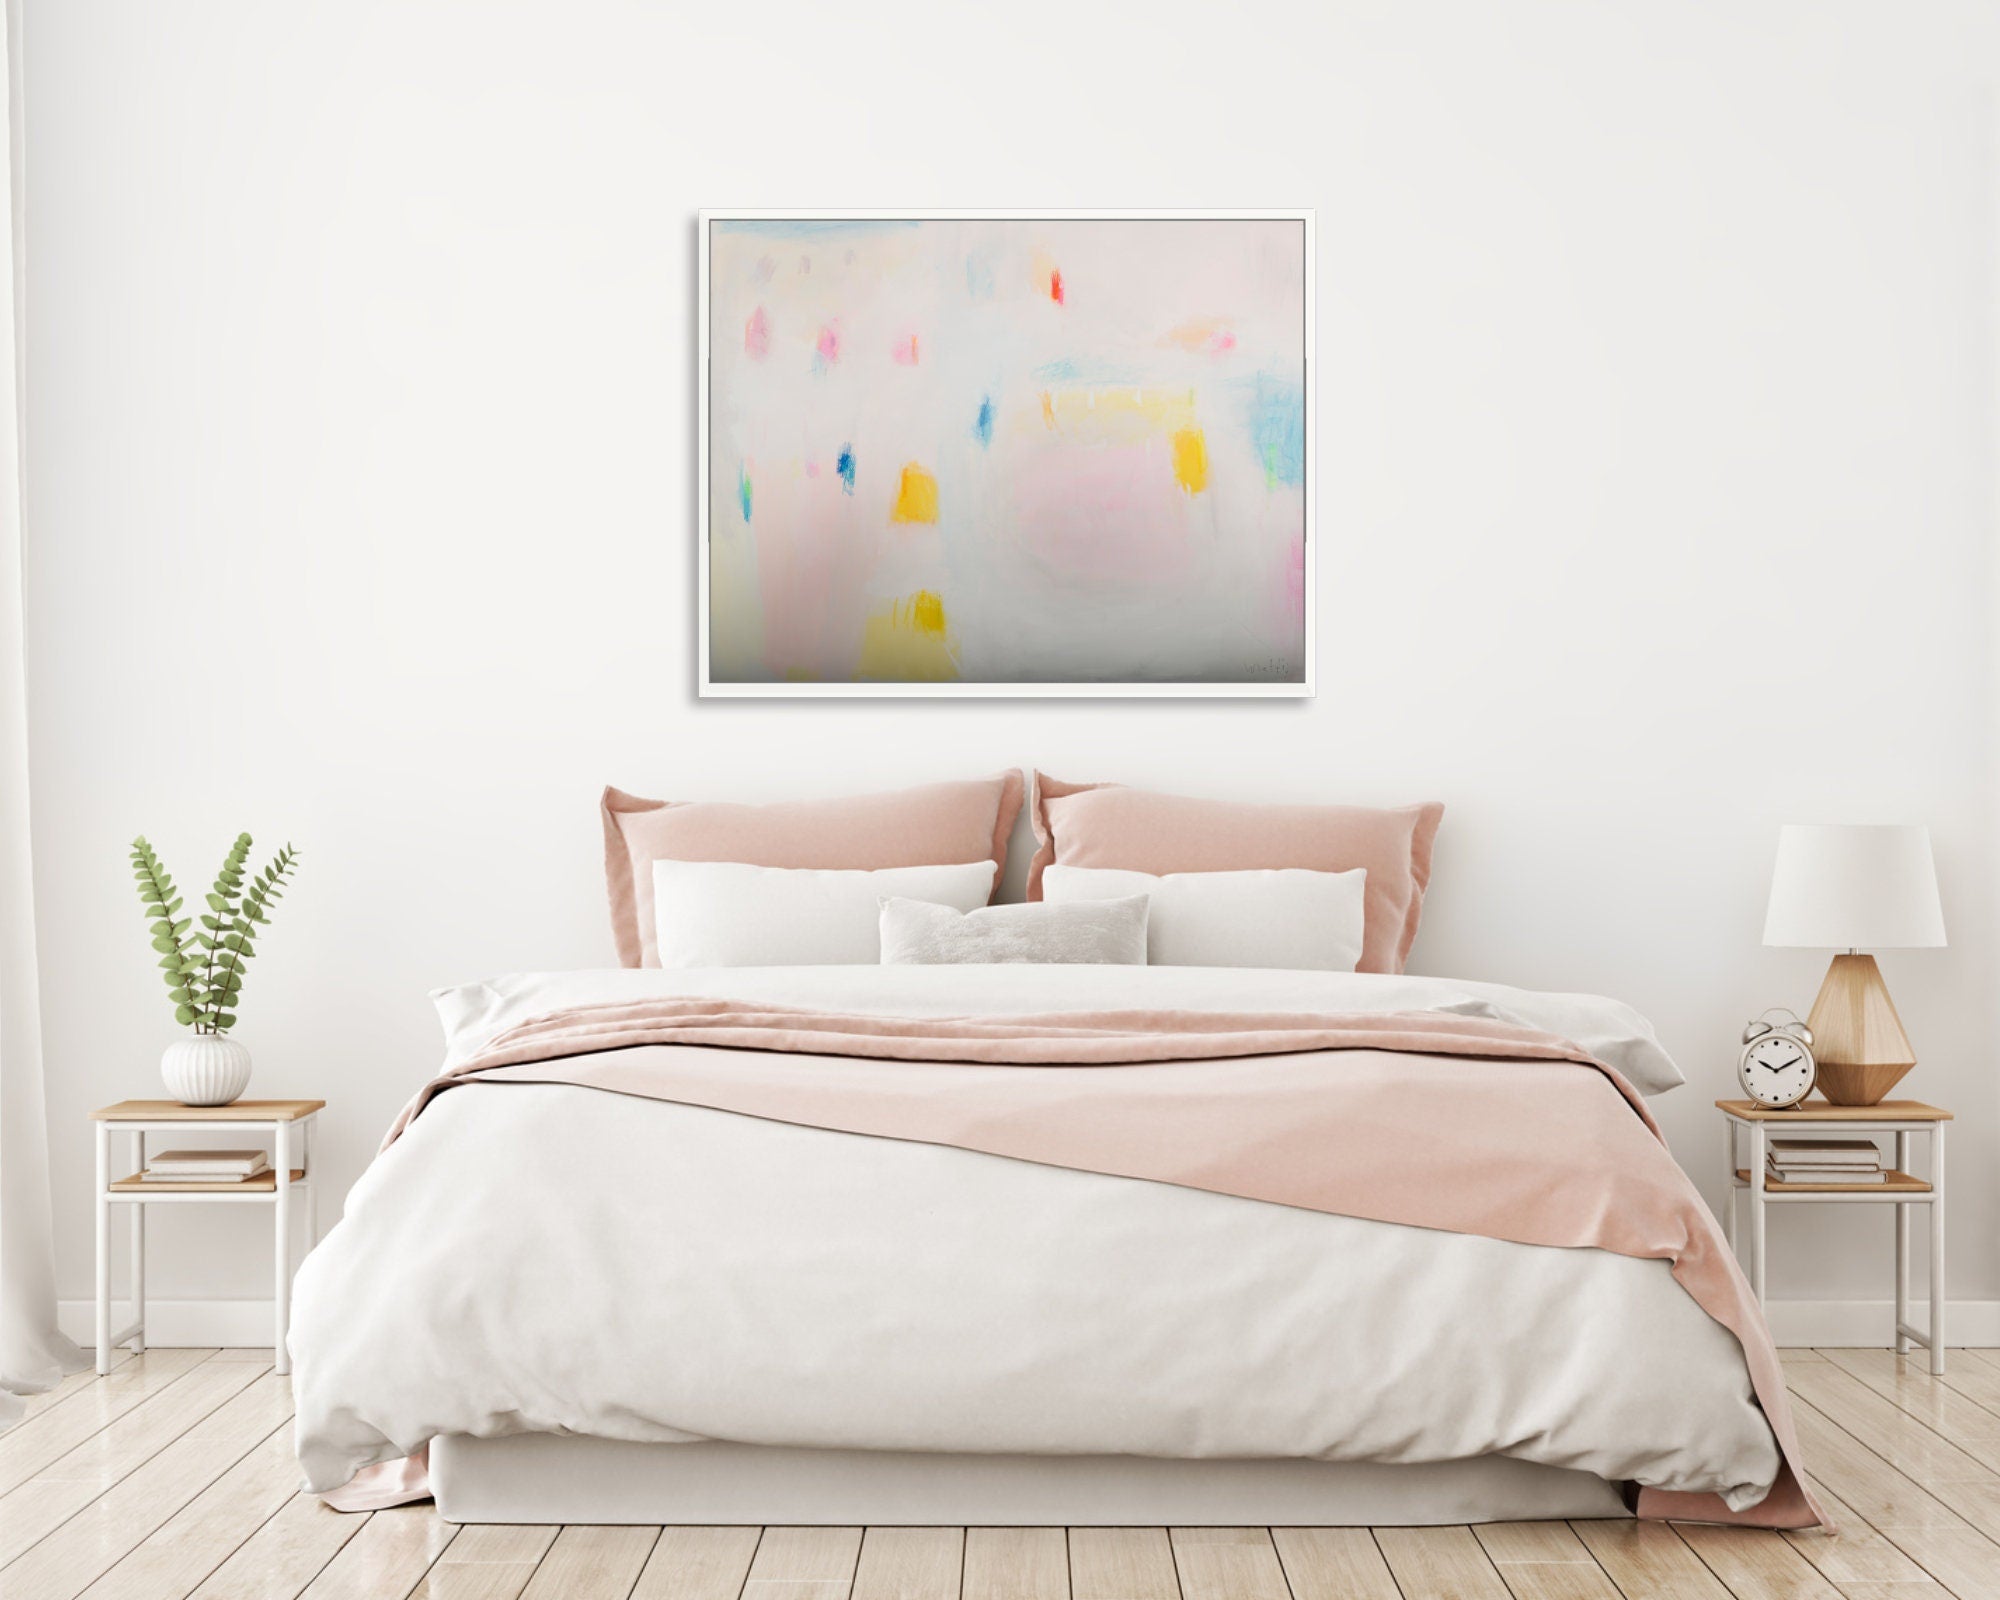 Original colorful canvas abstract painting, large wall art, extra large abstract canvas art by Camilo Mattis